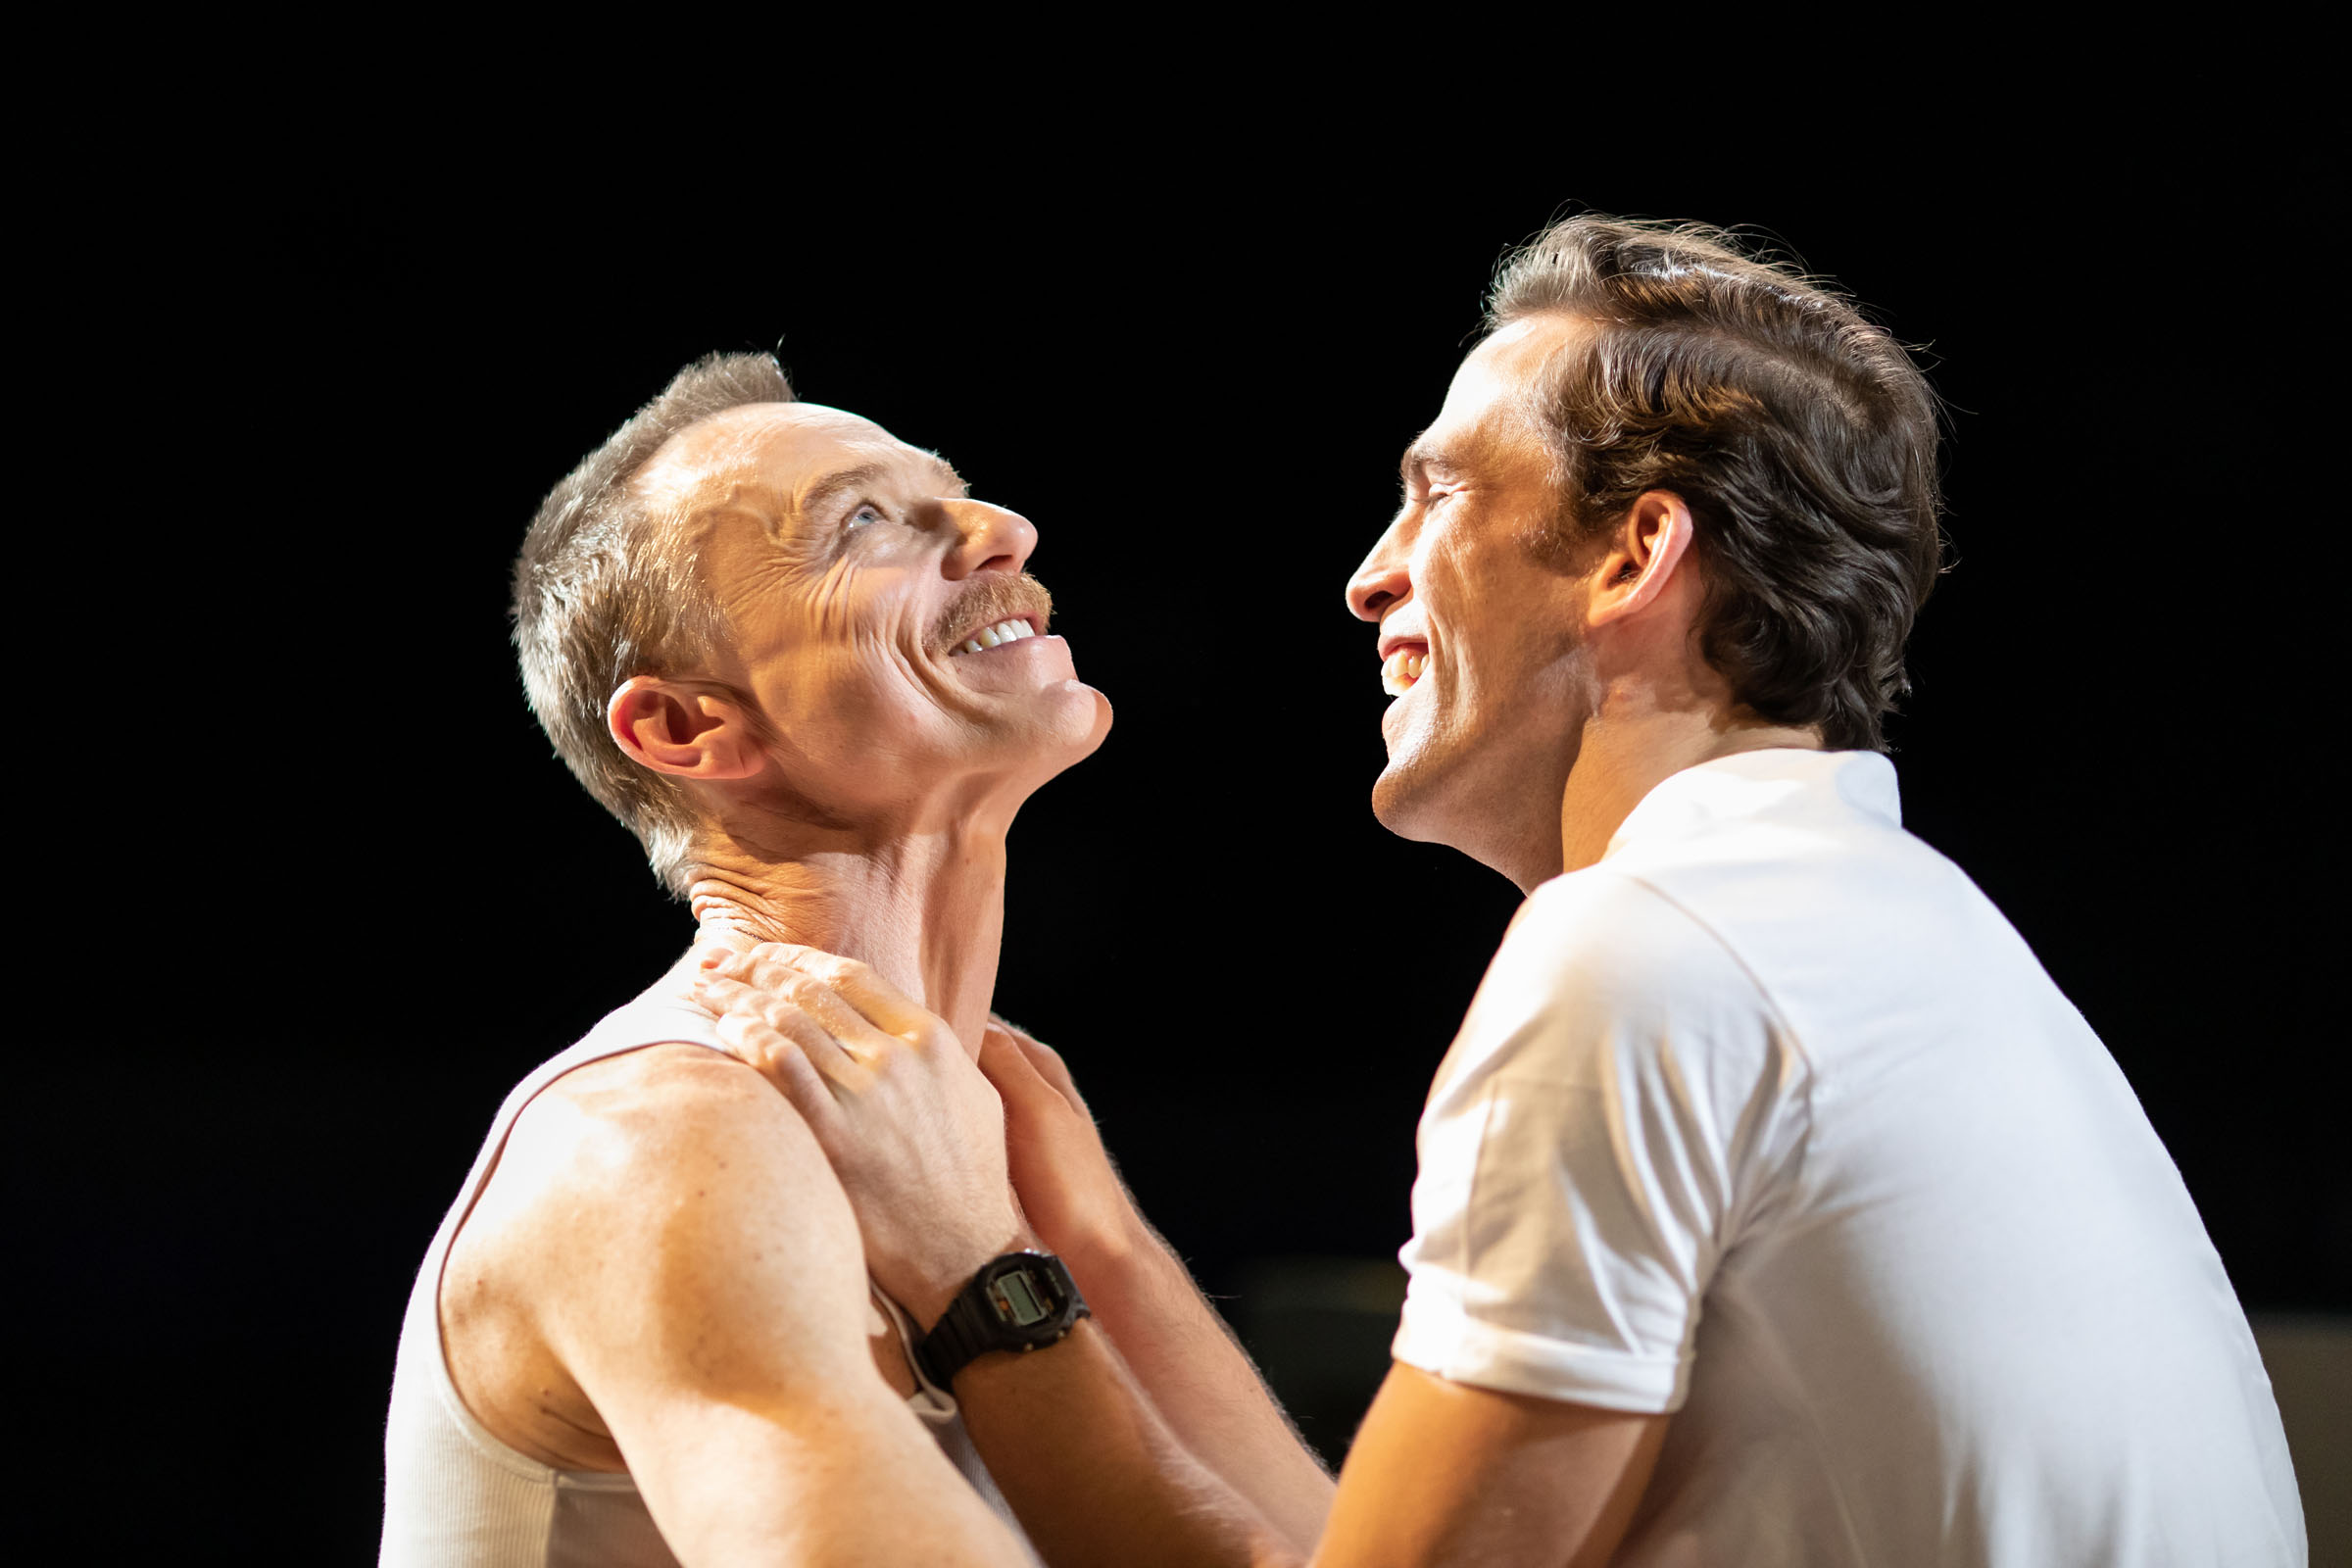 Ben Daniels (Ned Weeks) and Dino Fetscher (Felix Turner) in The Normal Heart at the National Theatre